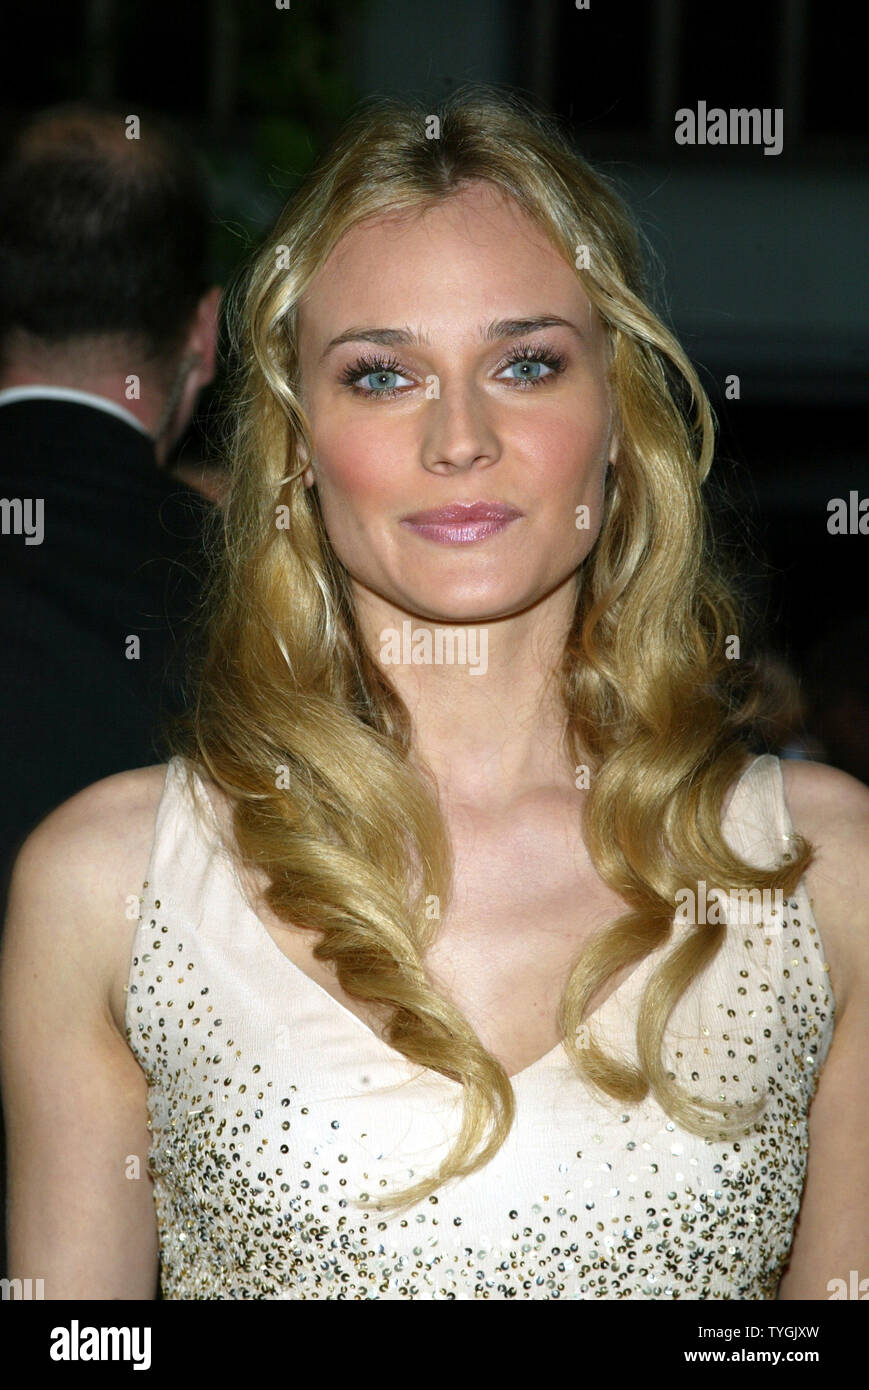 Diane Kruger poses for pictures at the premiere of 'Troy' at the Ziegfeld Theater in New York on May 10, 2004.   (UPI Photo/Laura Cavanaugh) Stock Photo